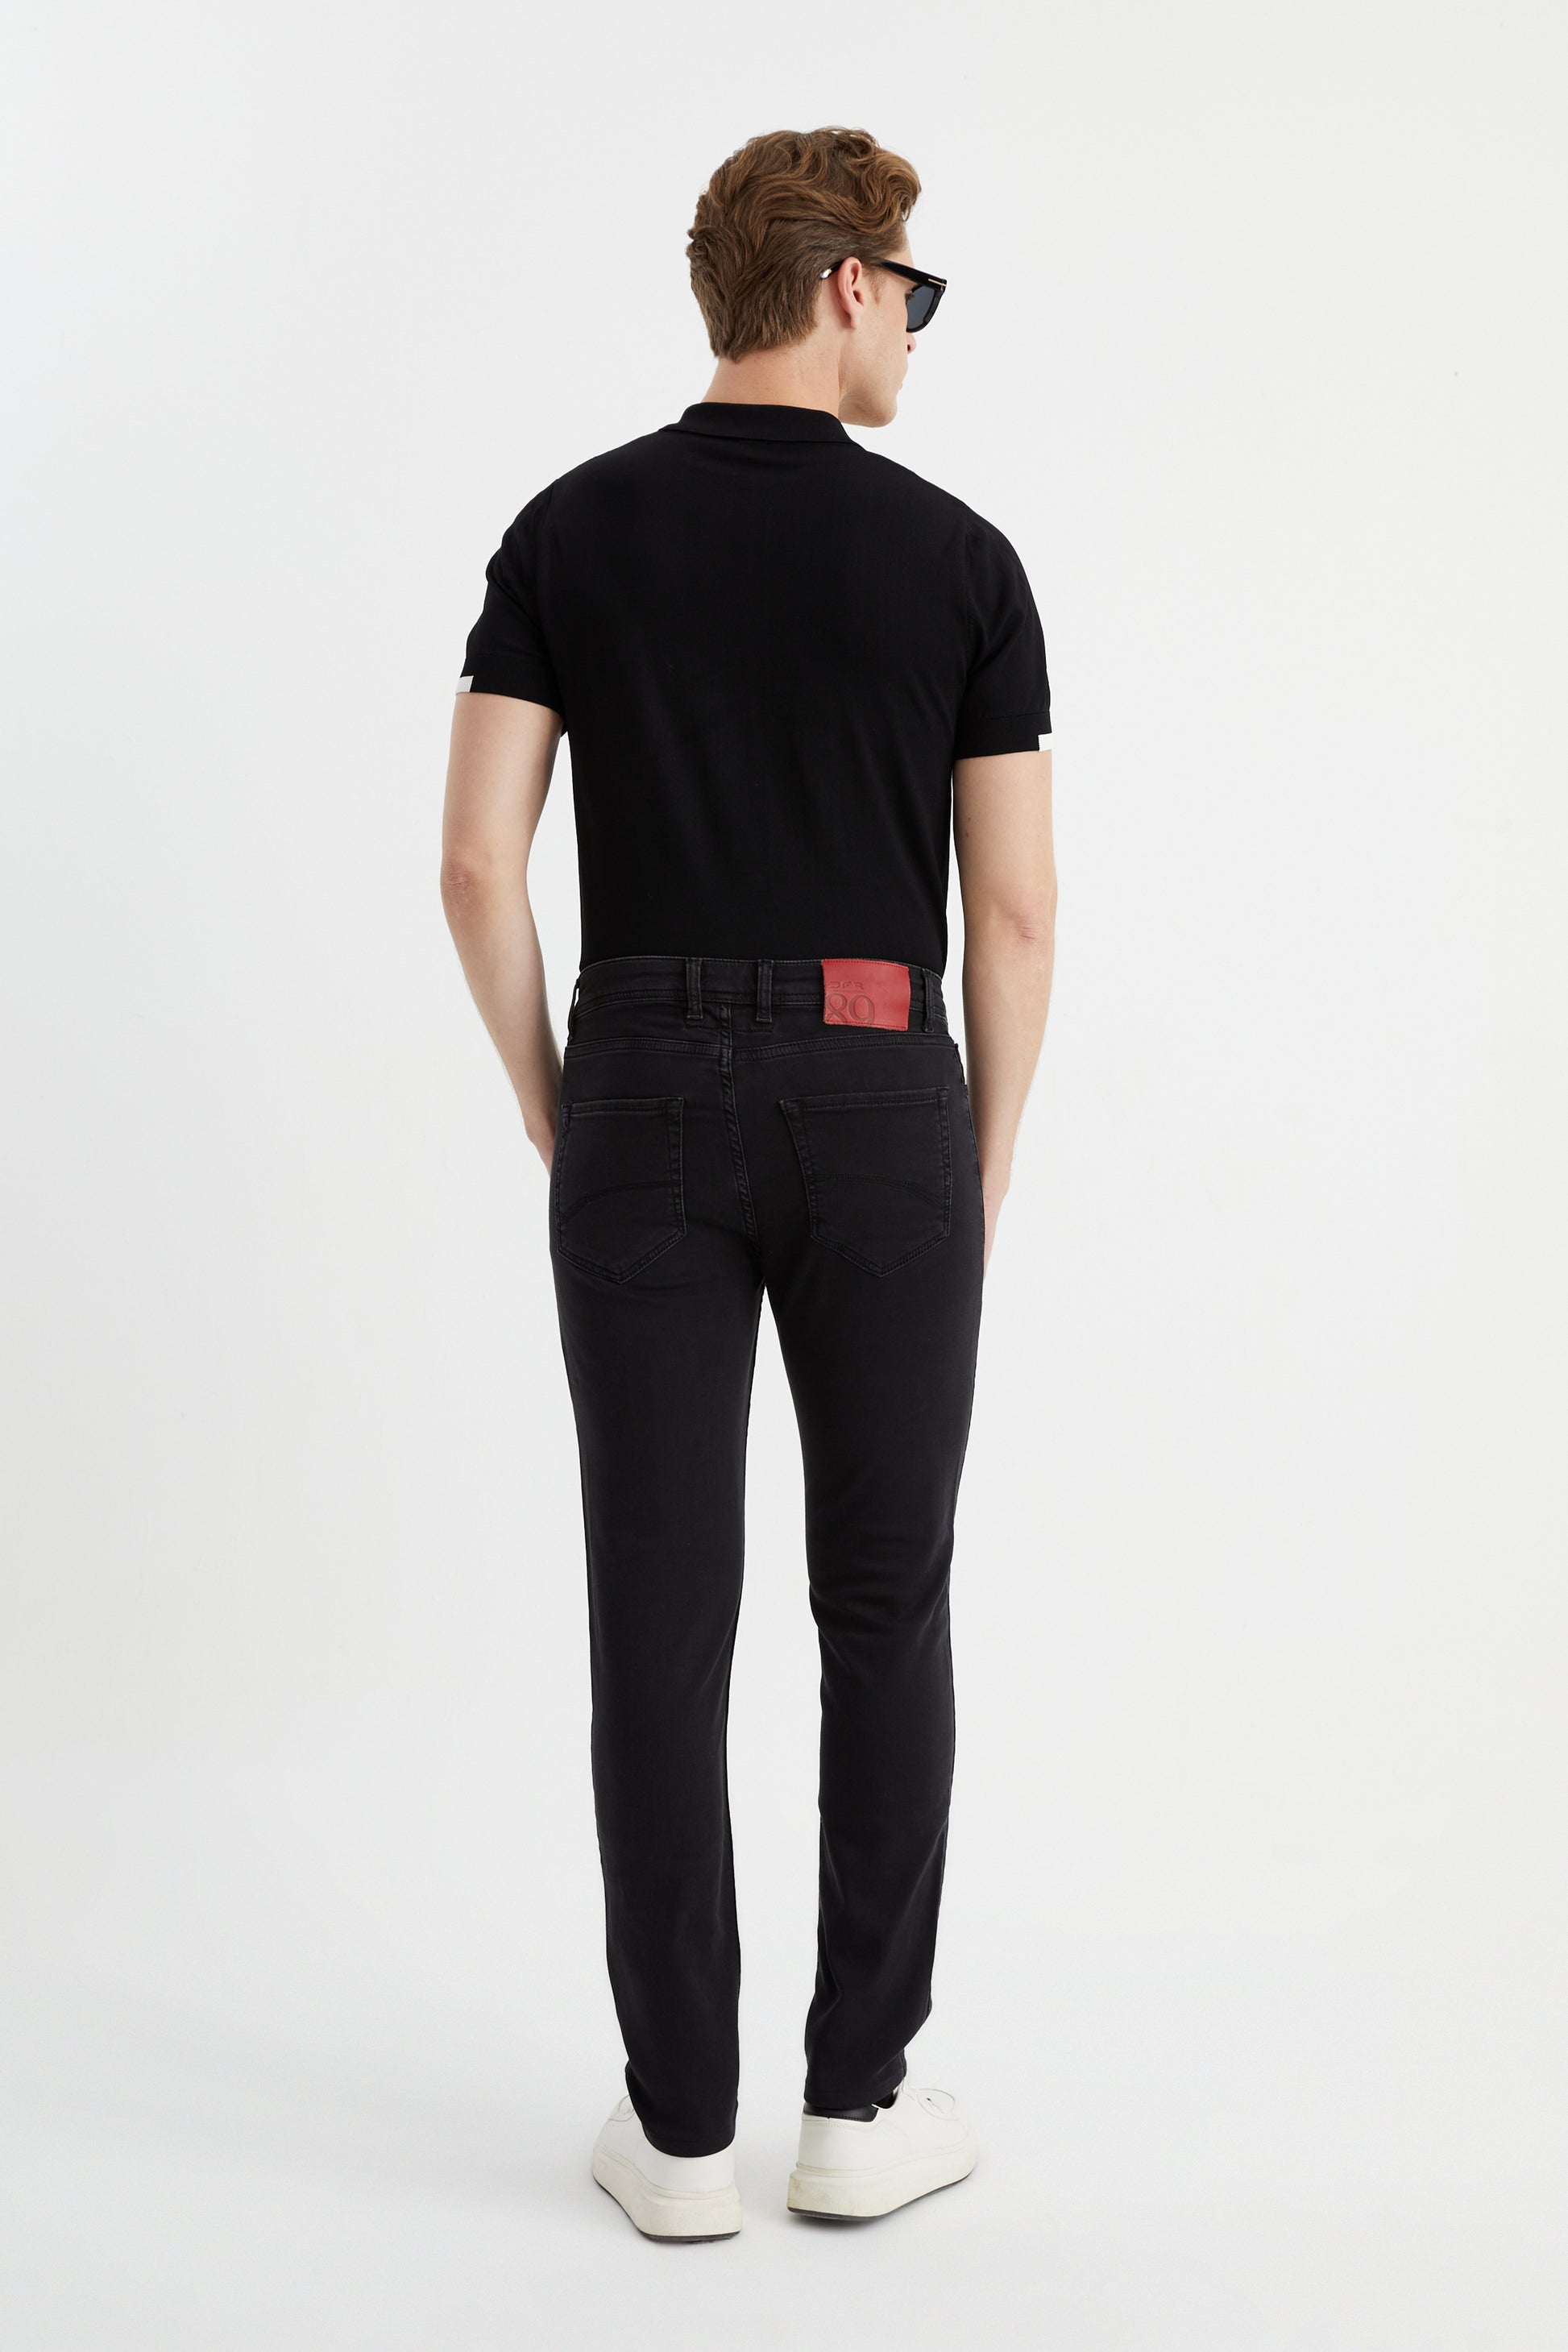 DFR89 stretchy, premium denim jeans, black/grey. Built for style and comfort